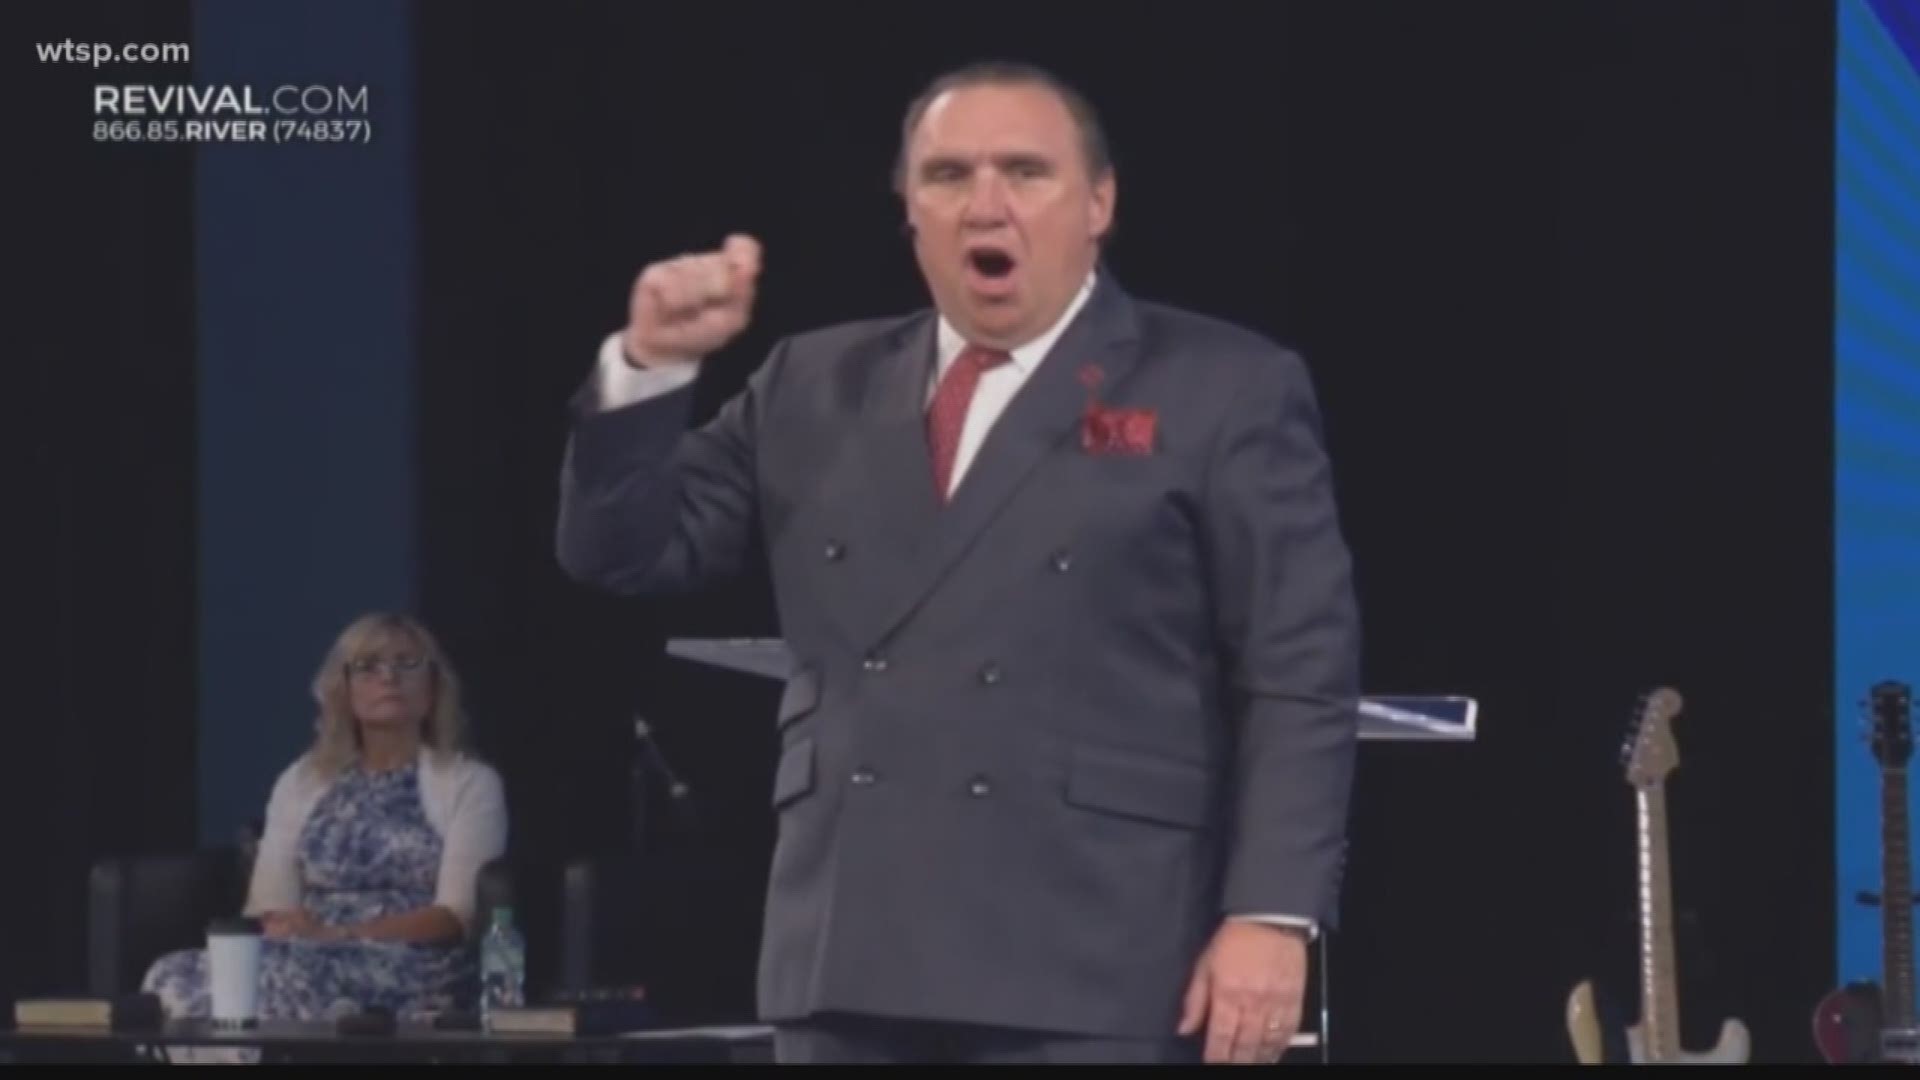 An arrest warrant for Tampa Bay pastor Rodney Howard-Browne was issued Monday, and the pastor was taken into custody for violating the "safer-at-home" order.